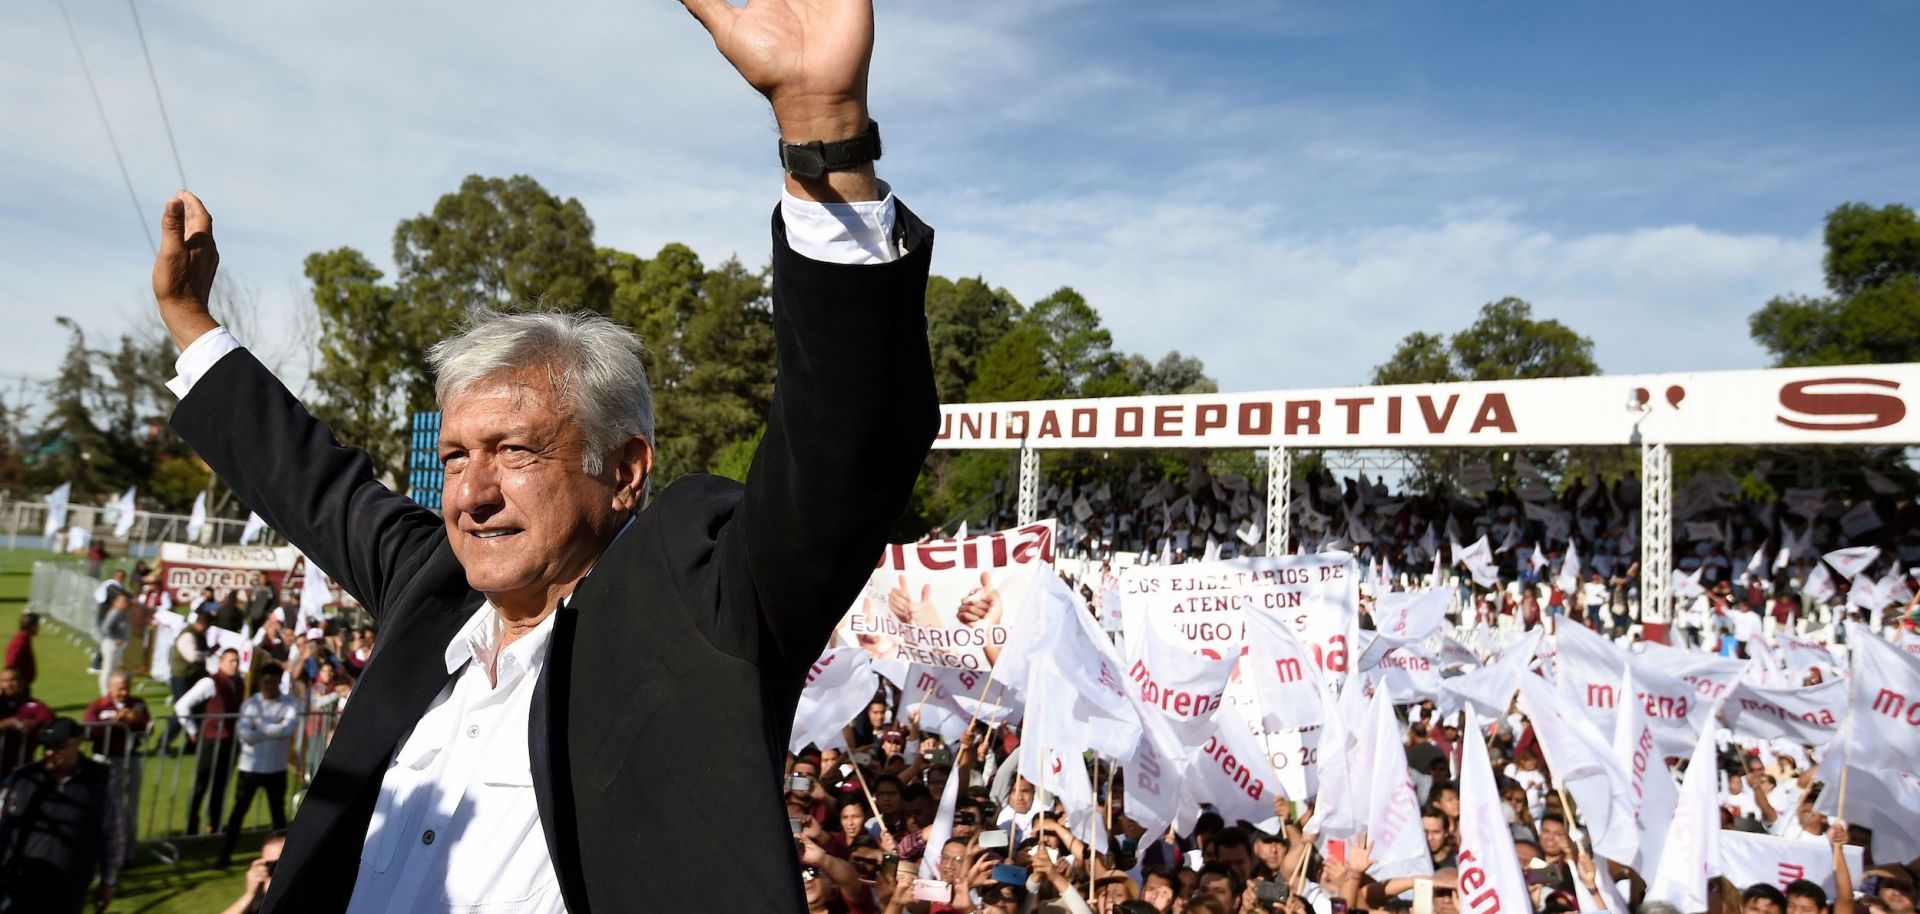 Mexican presidential candidate Andres Manuel Lopez Obrador stands at a campaign rally.